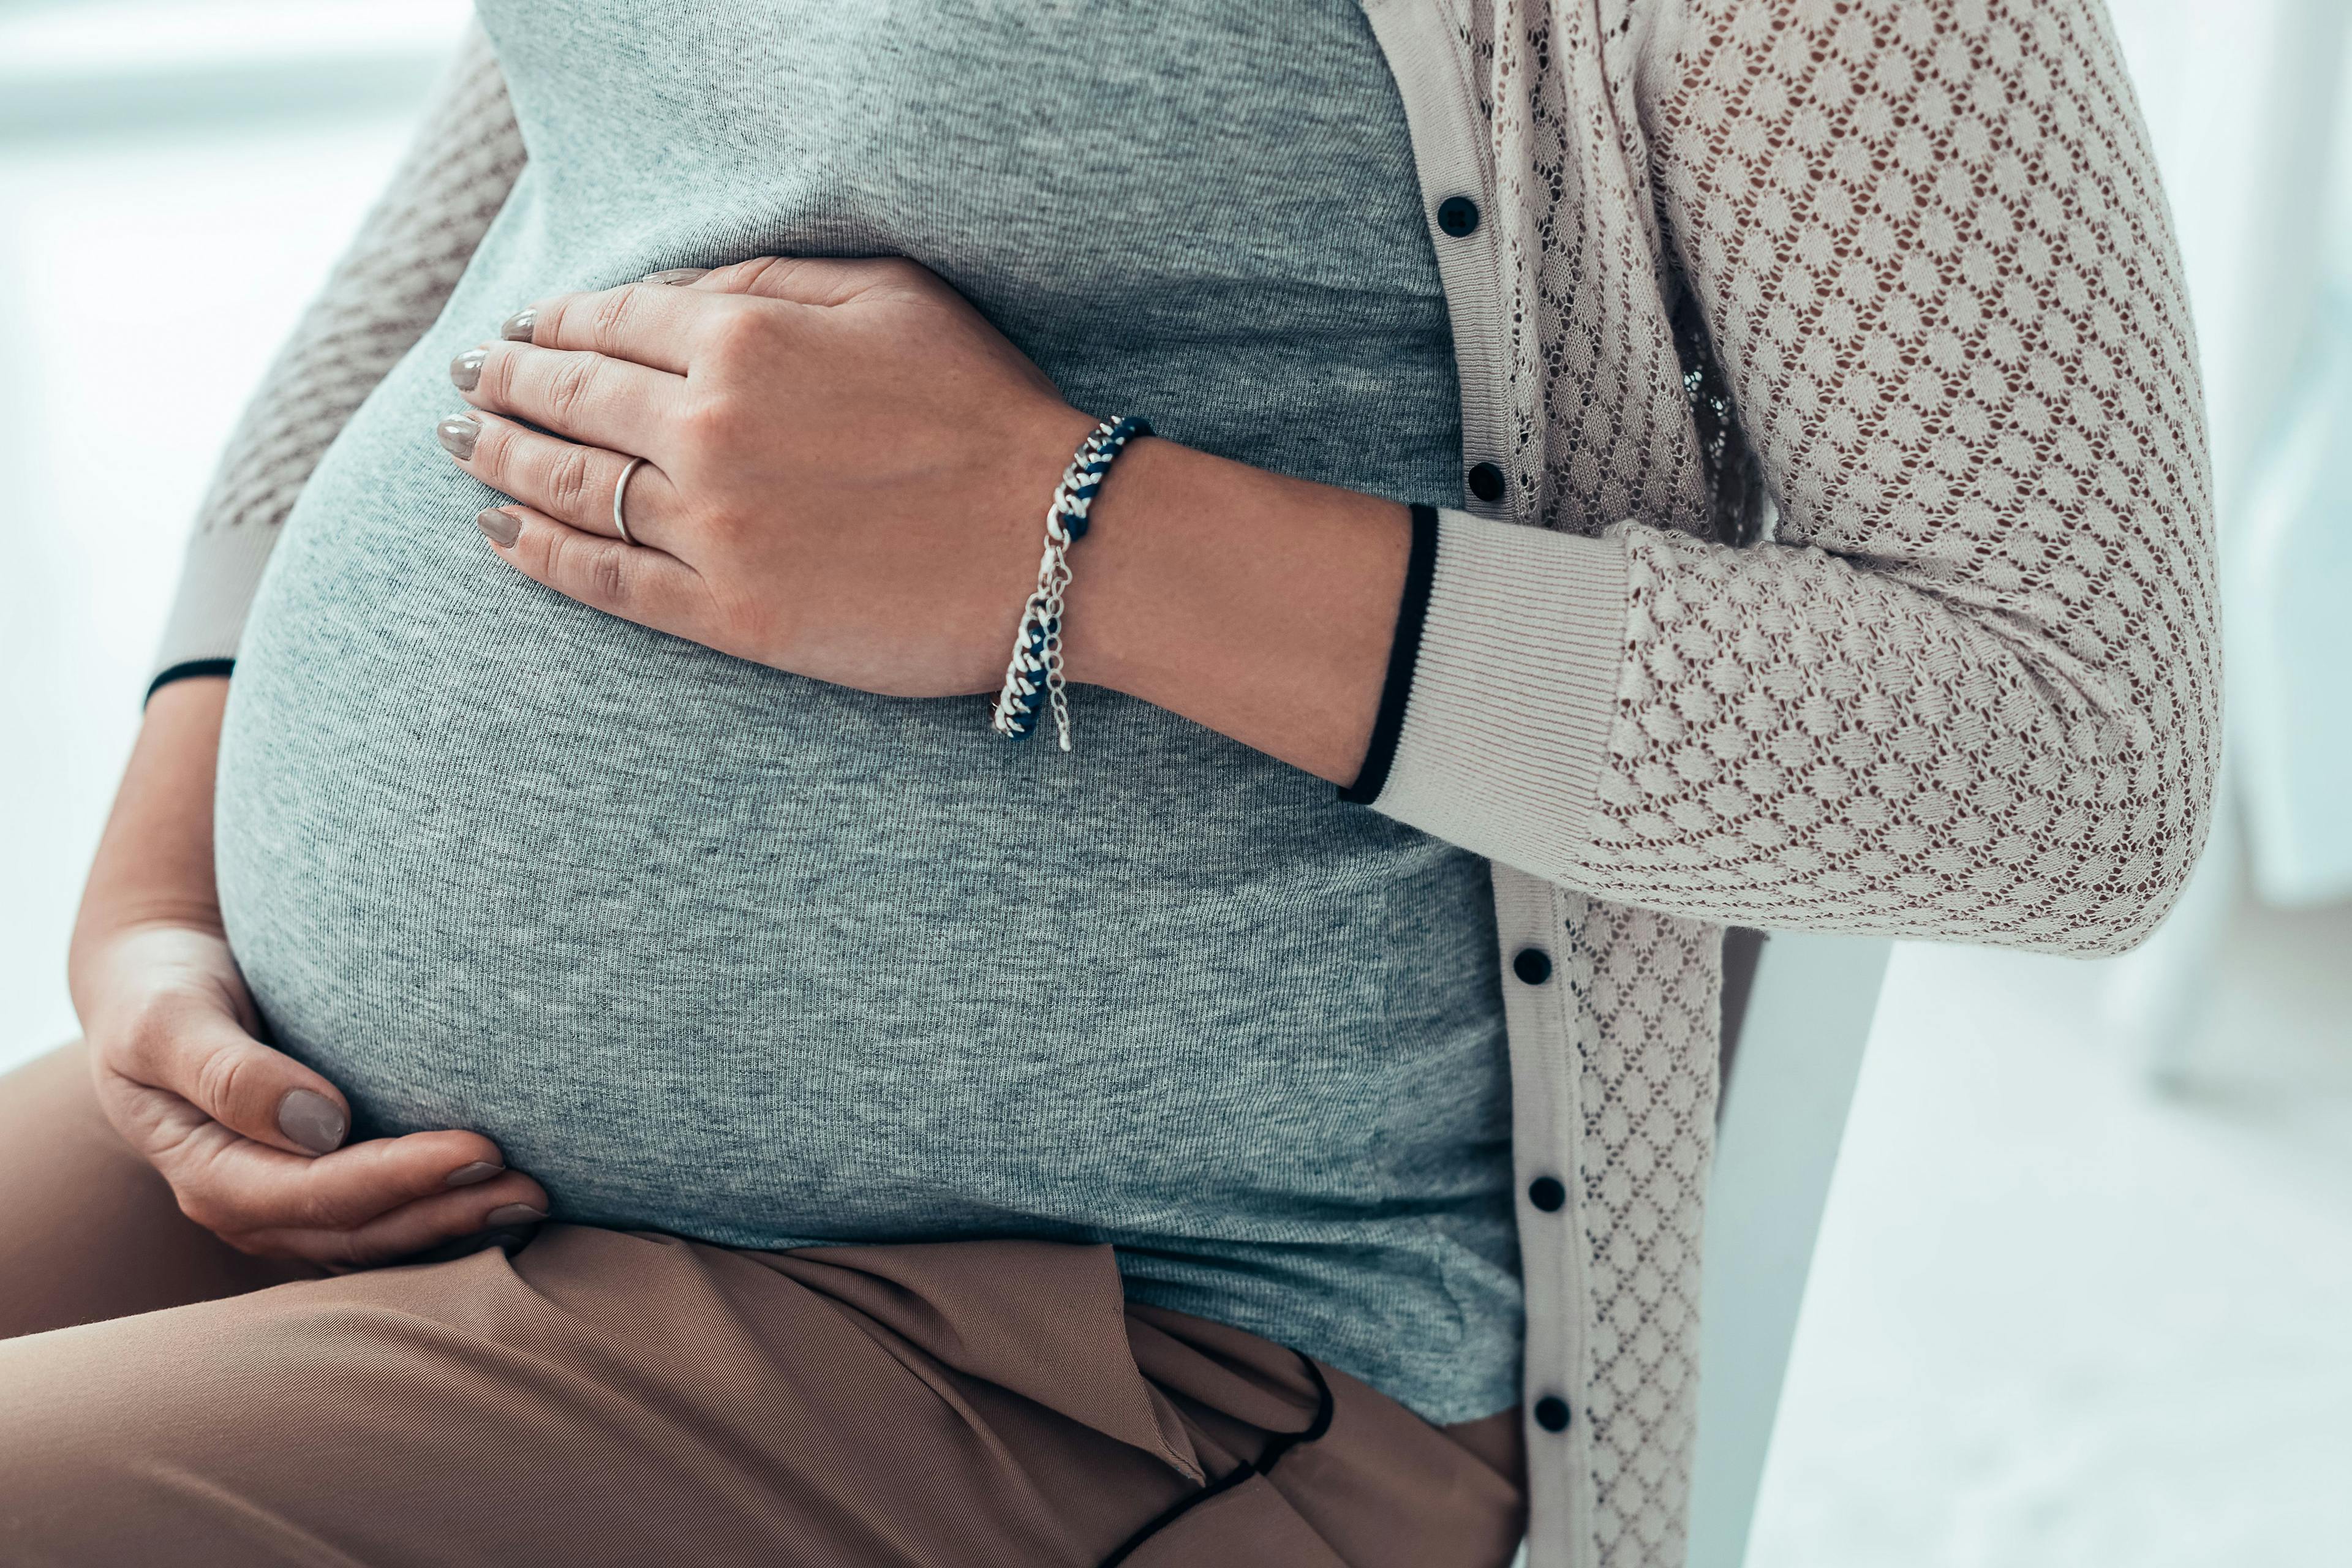 Will it hurt my baby? Researchers investigated associations between first trimester exposure to second-generation antipsychotics and major congenital malformations.